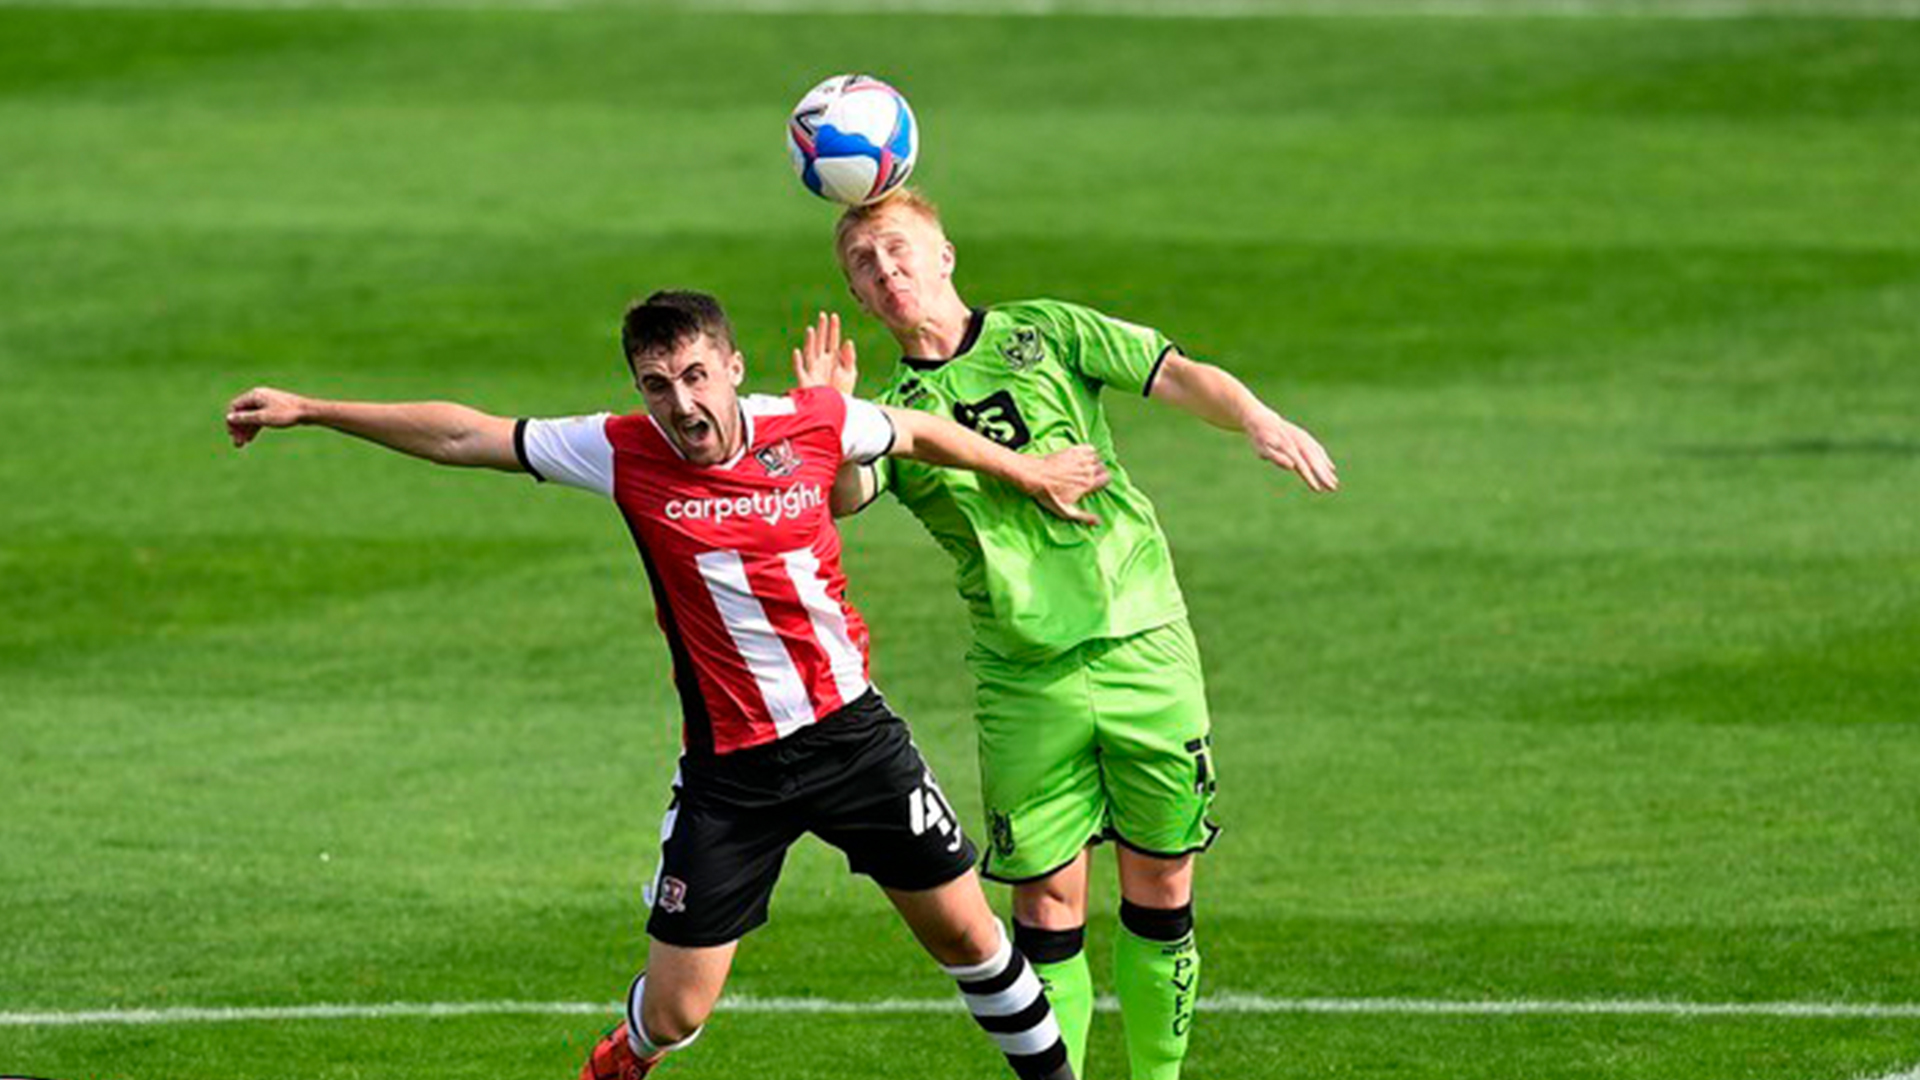 Exeter City vs Port Vale on 19 Sep 20 - Match Centre - Exeter City FC